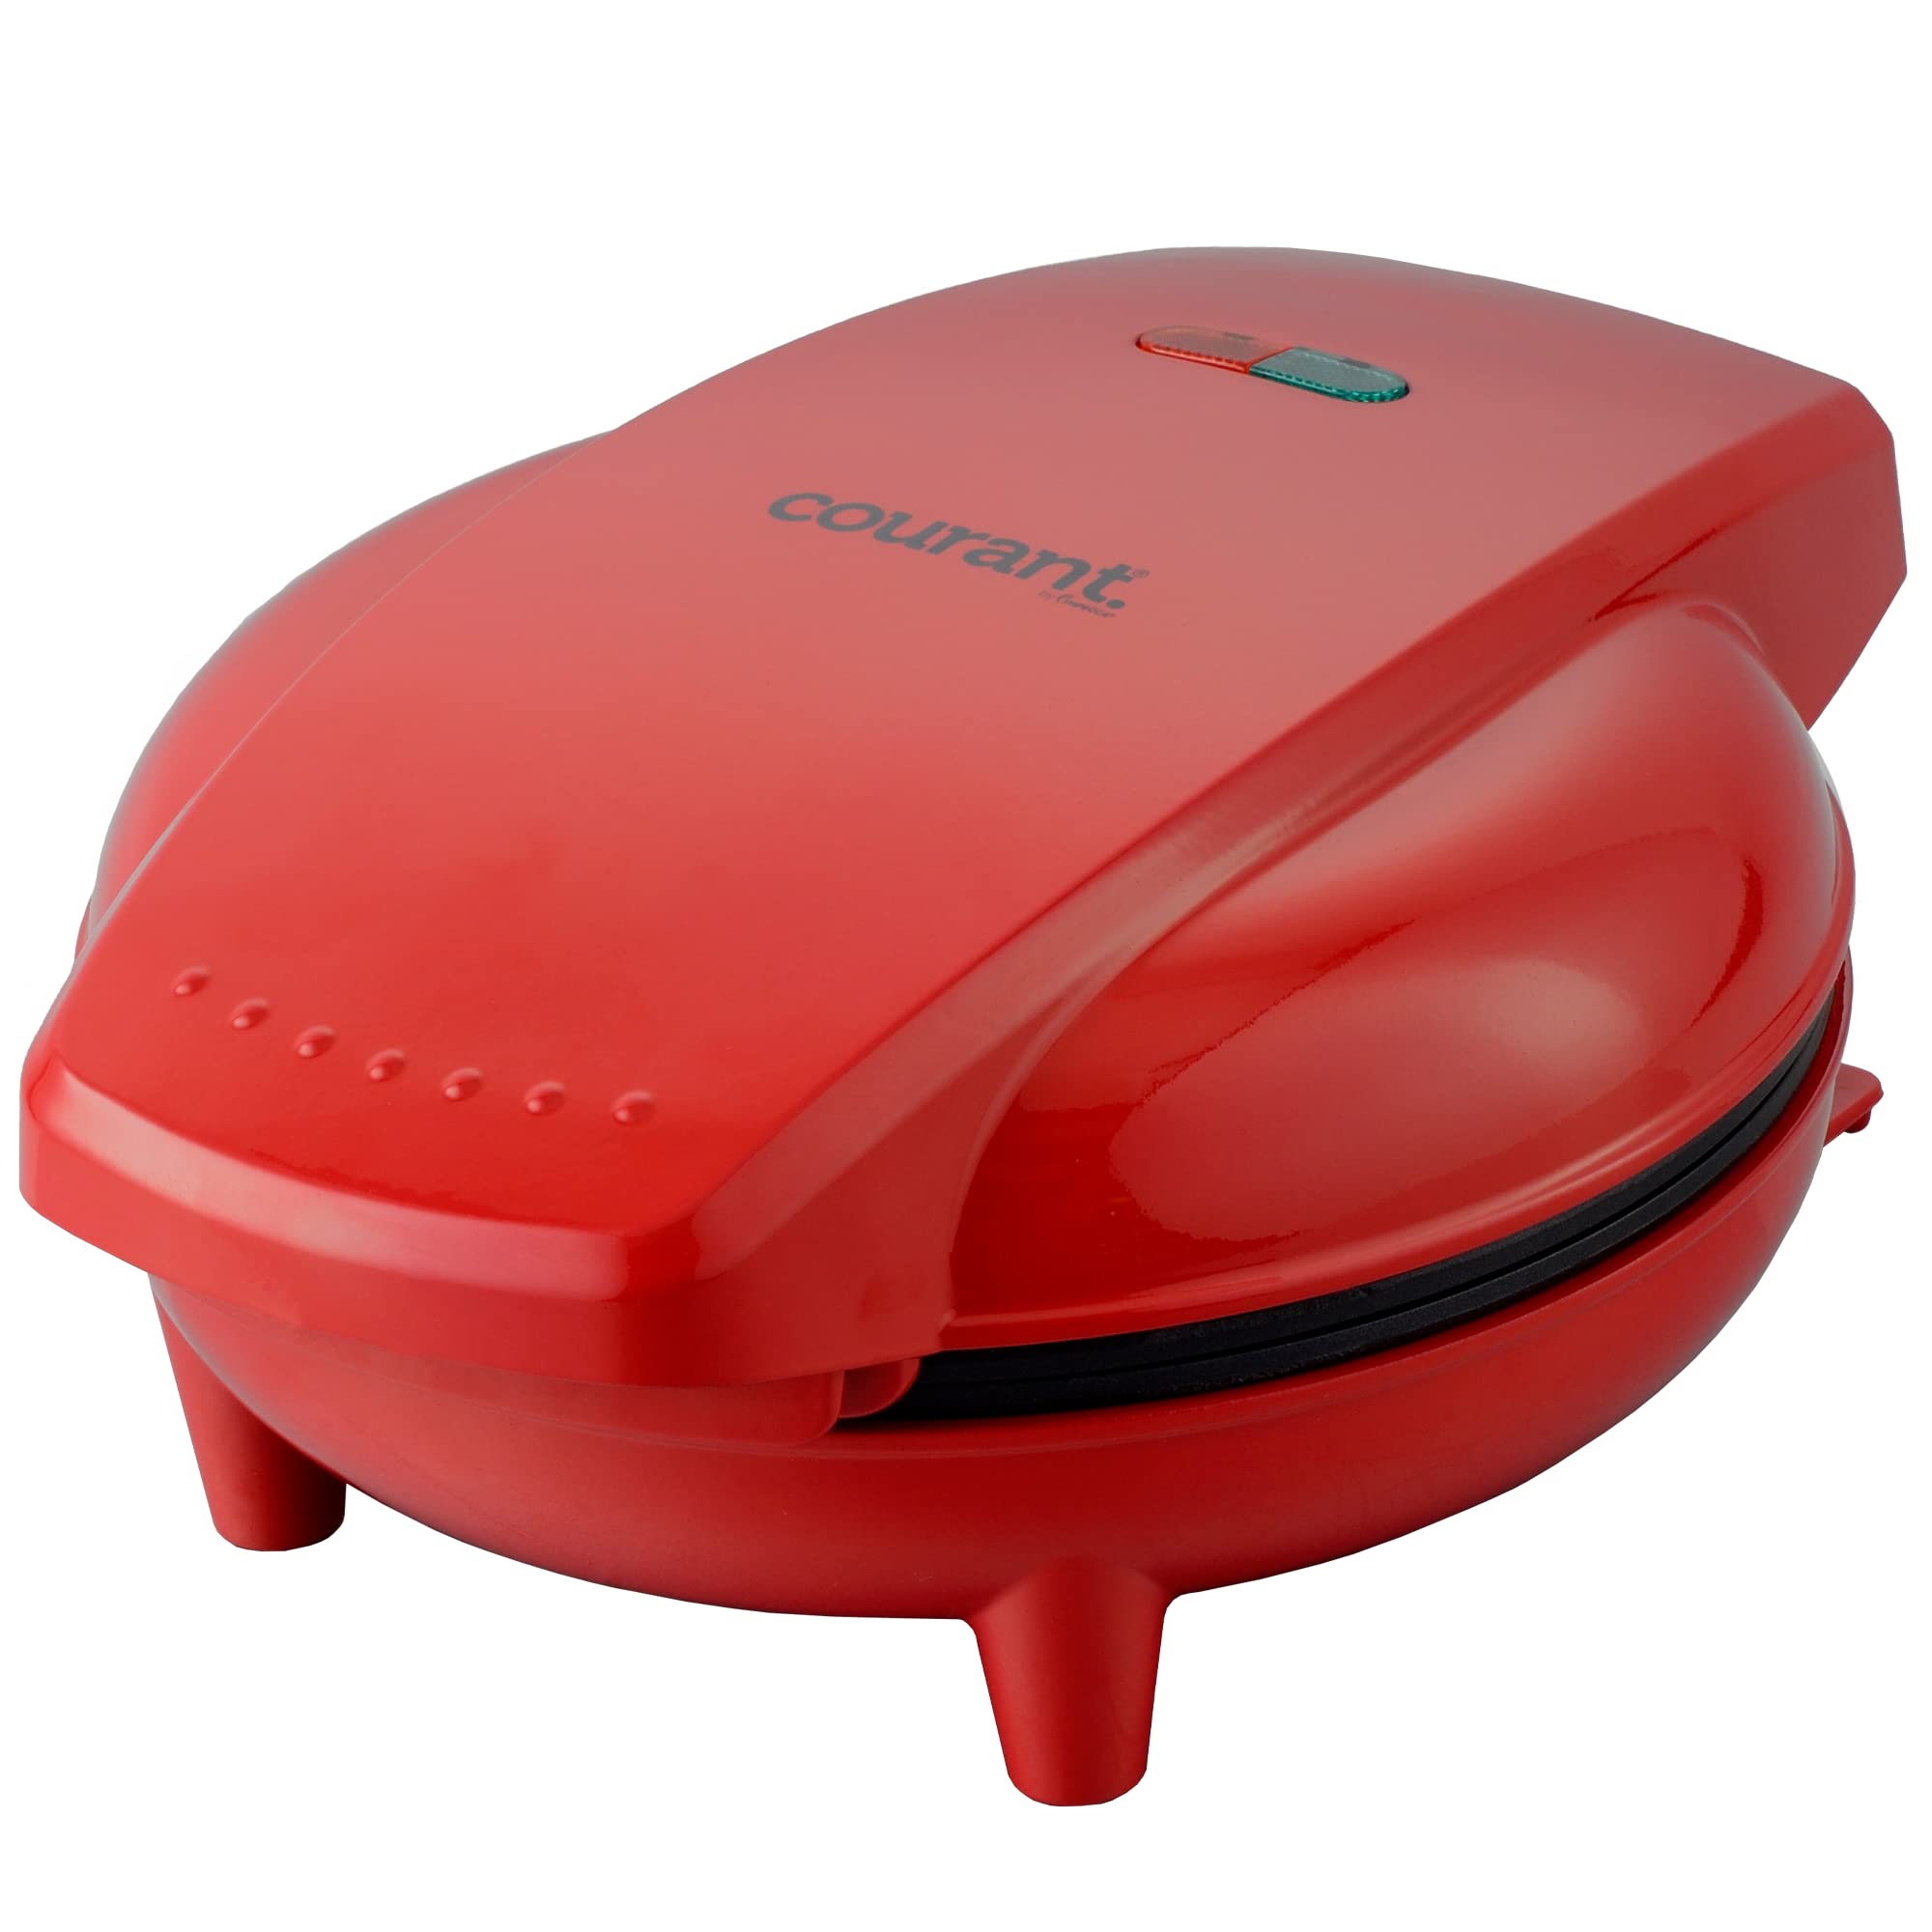 Courant Waffle Maker 7-inch Round Waffles in less then 5 minutes Delicious Belgian Waffles